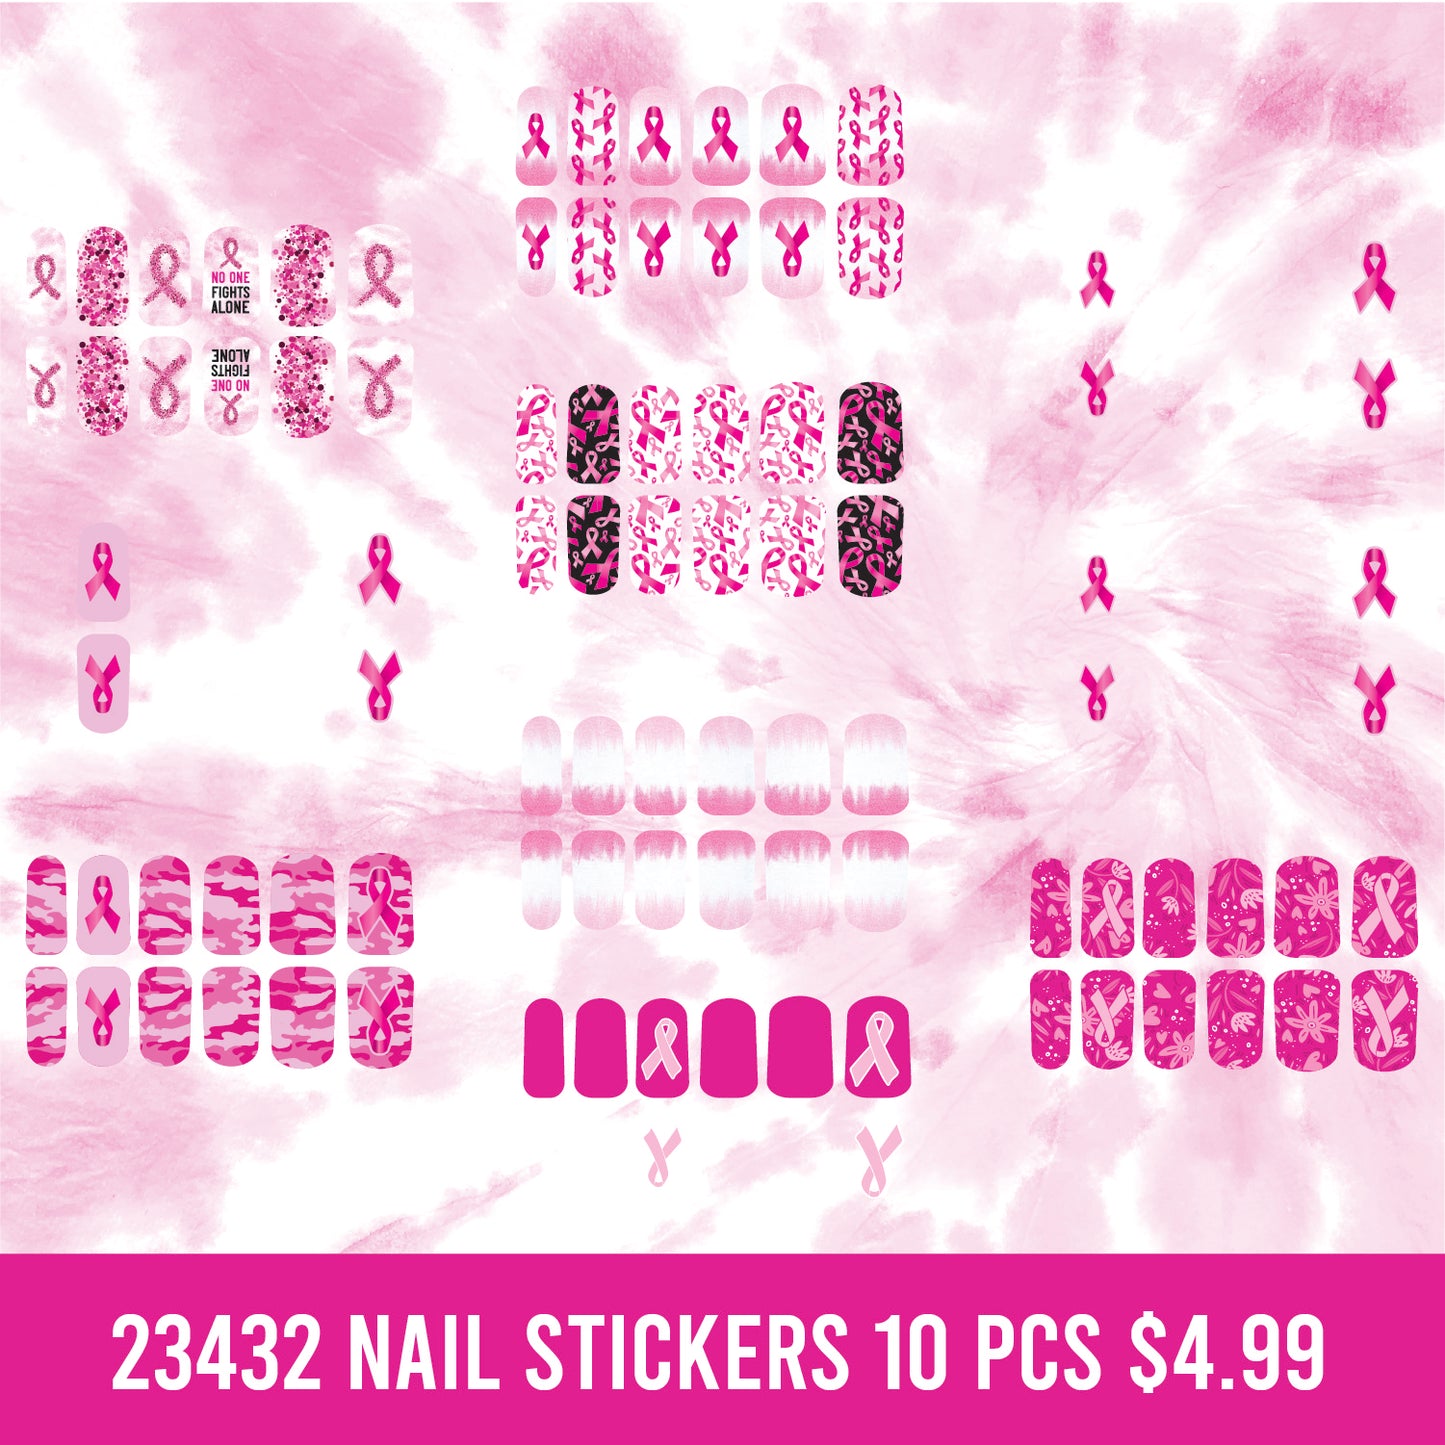 ITEM NUMBER 023432L PINK NAIL STICKERS - STORE SURPLUS NO DISPLAY 10 PIECES PER PACK